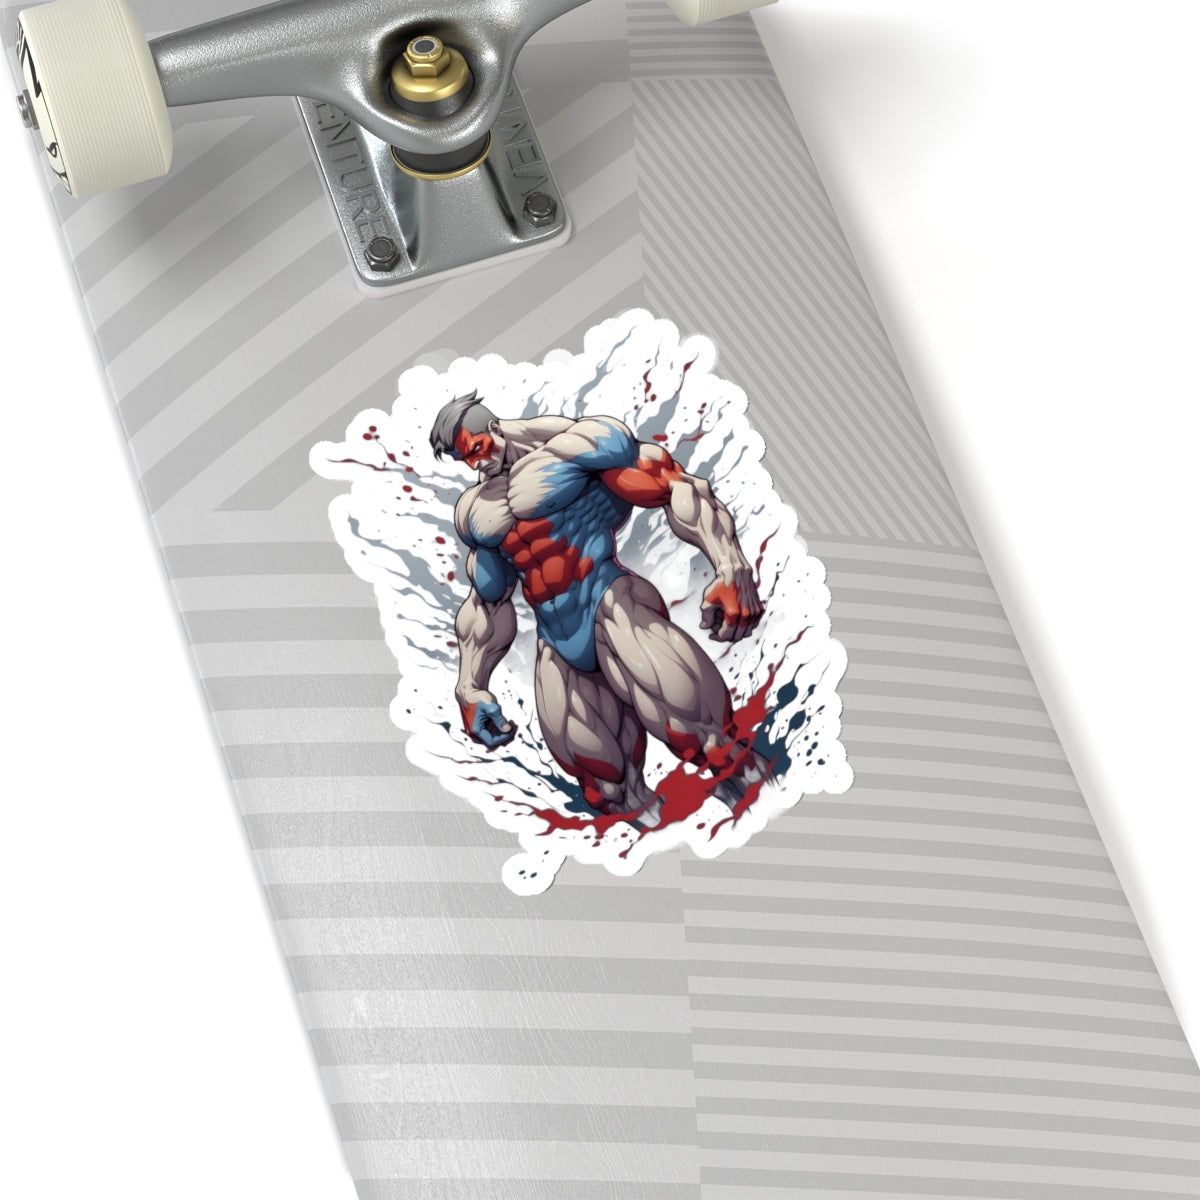 Kǎtōng Piàn - Prized Fighter Collection - America - 006 - Stickers